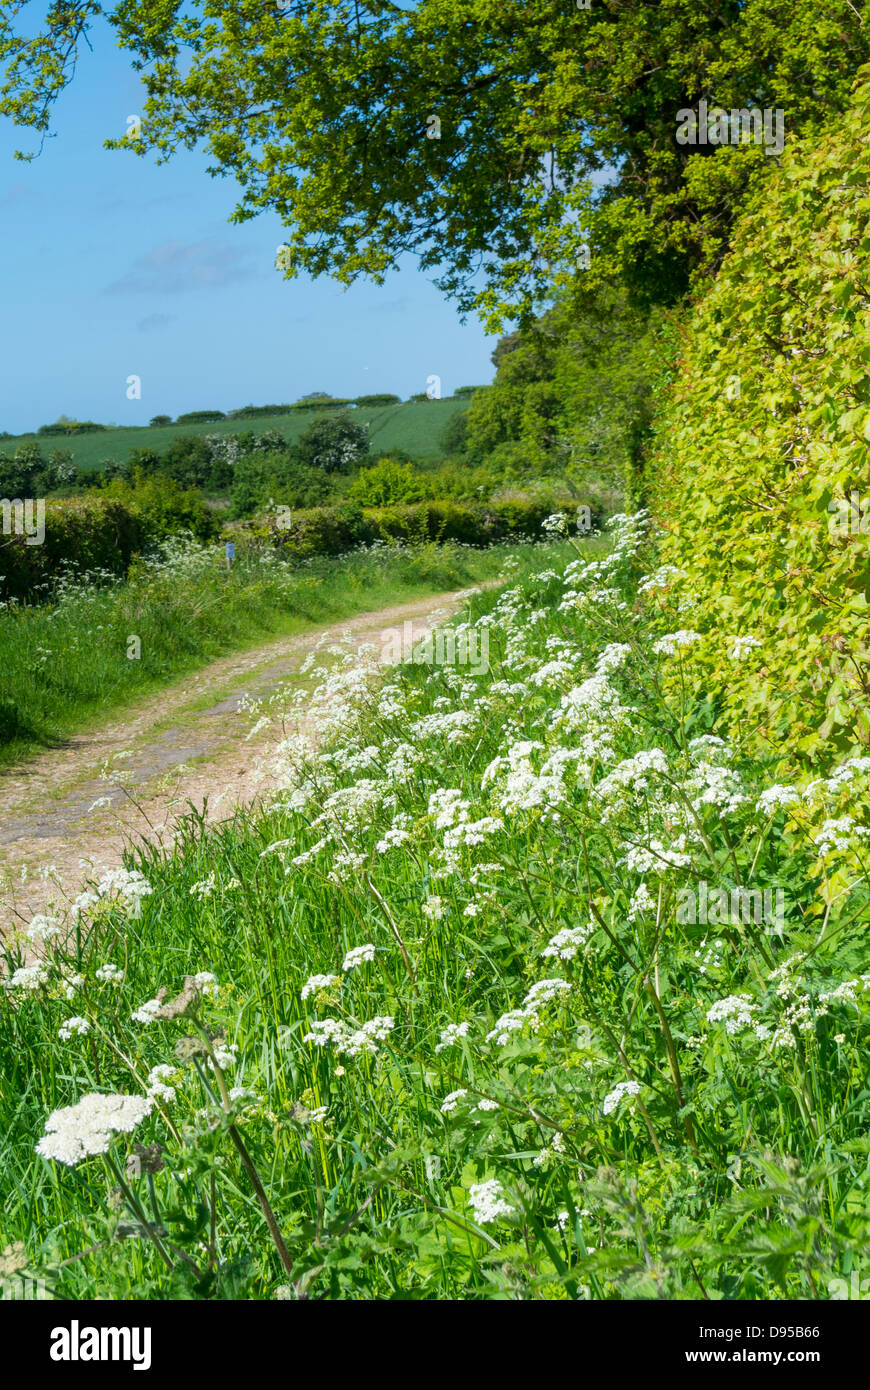 quiet, lane, track, deserted, no one, blue sky, summer, sun, hedgerows, Stock Photo